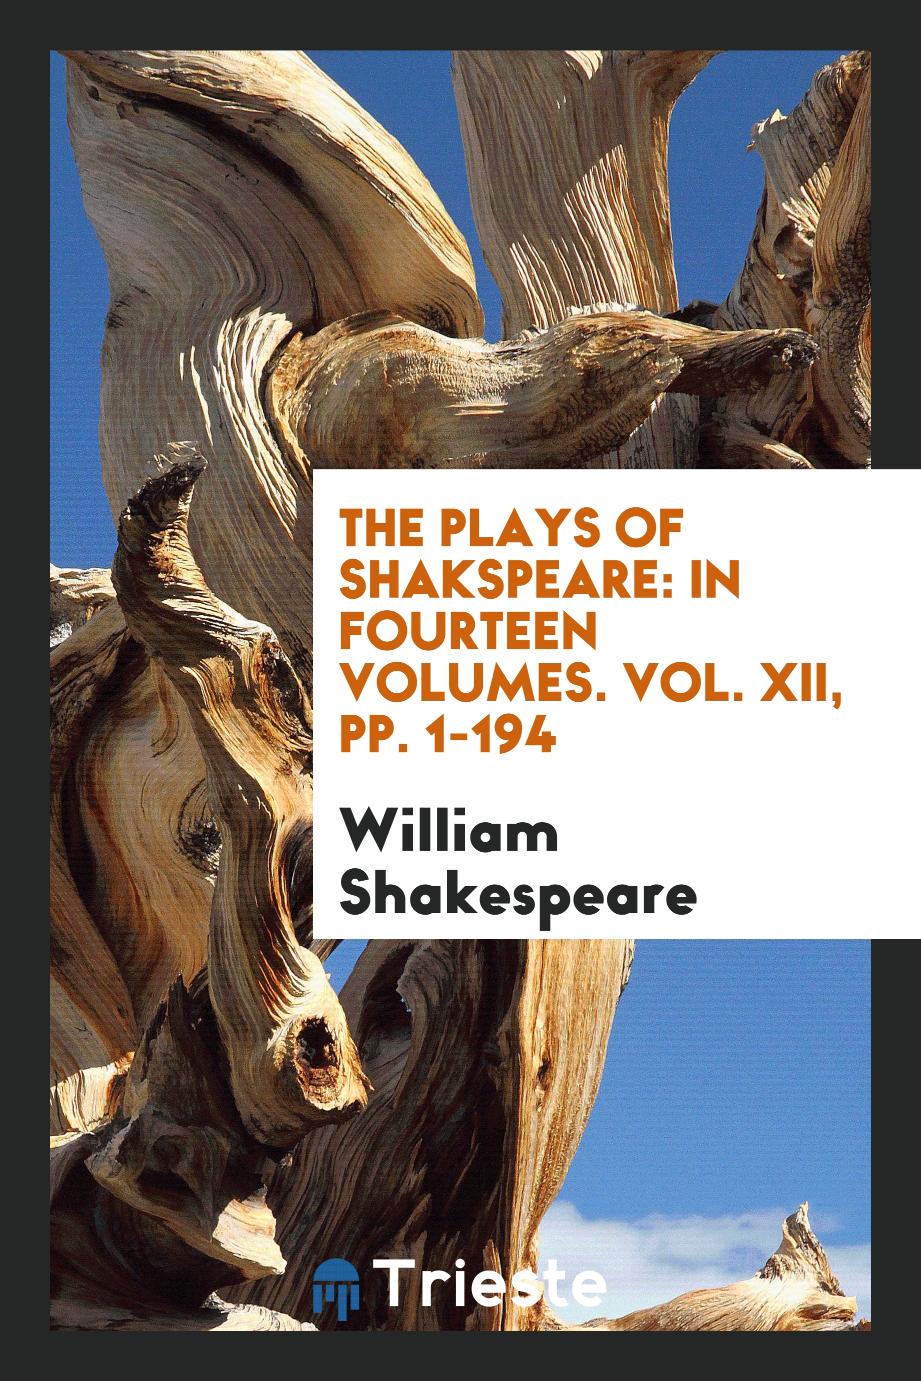 The Plays of Shakspeare: In Fourteen Volumes. Vol. XII, pp. 1-194